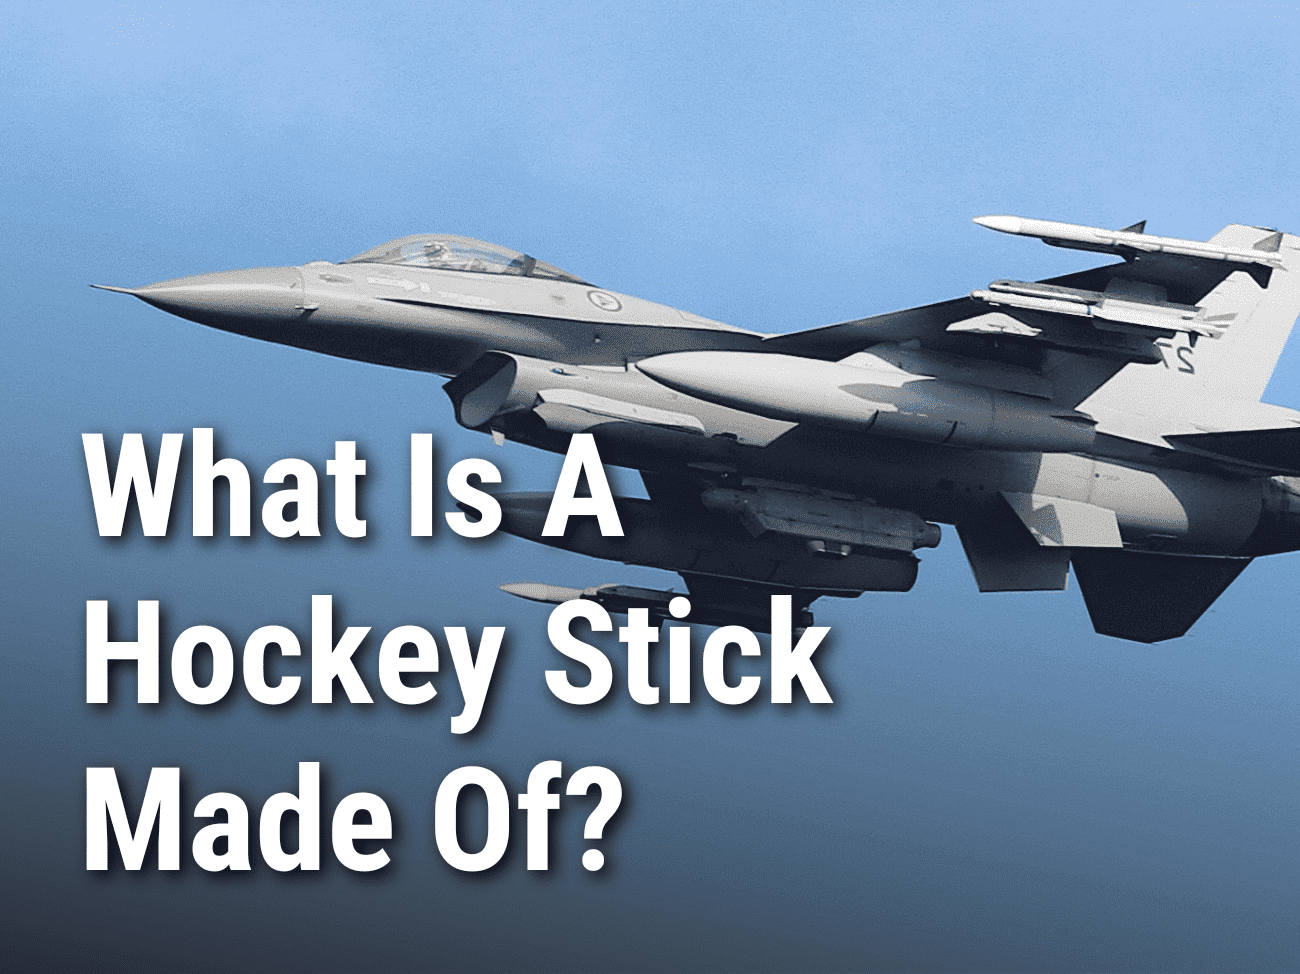 What Is A Hockey Stick Made Of?